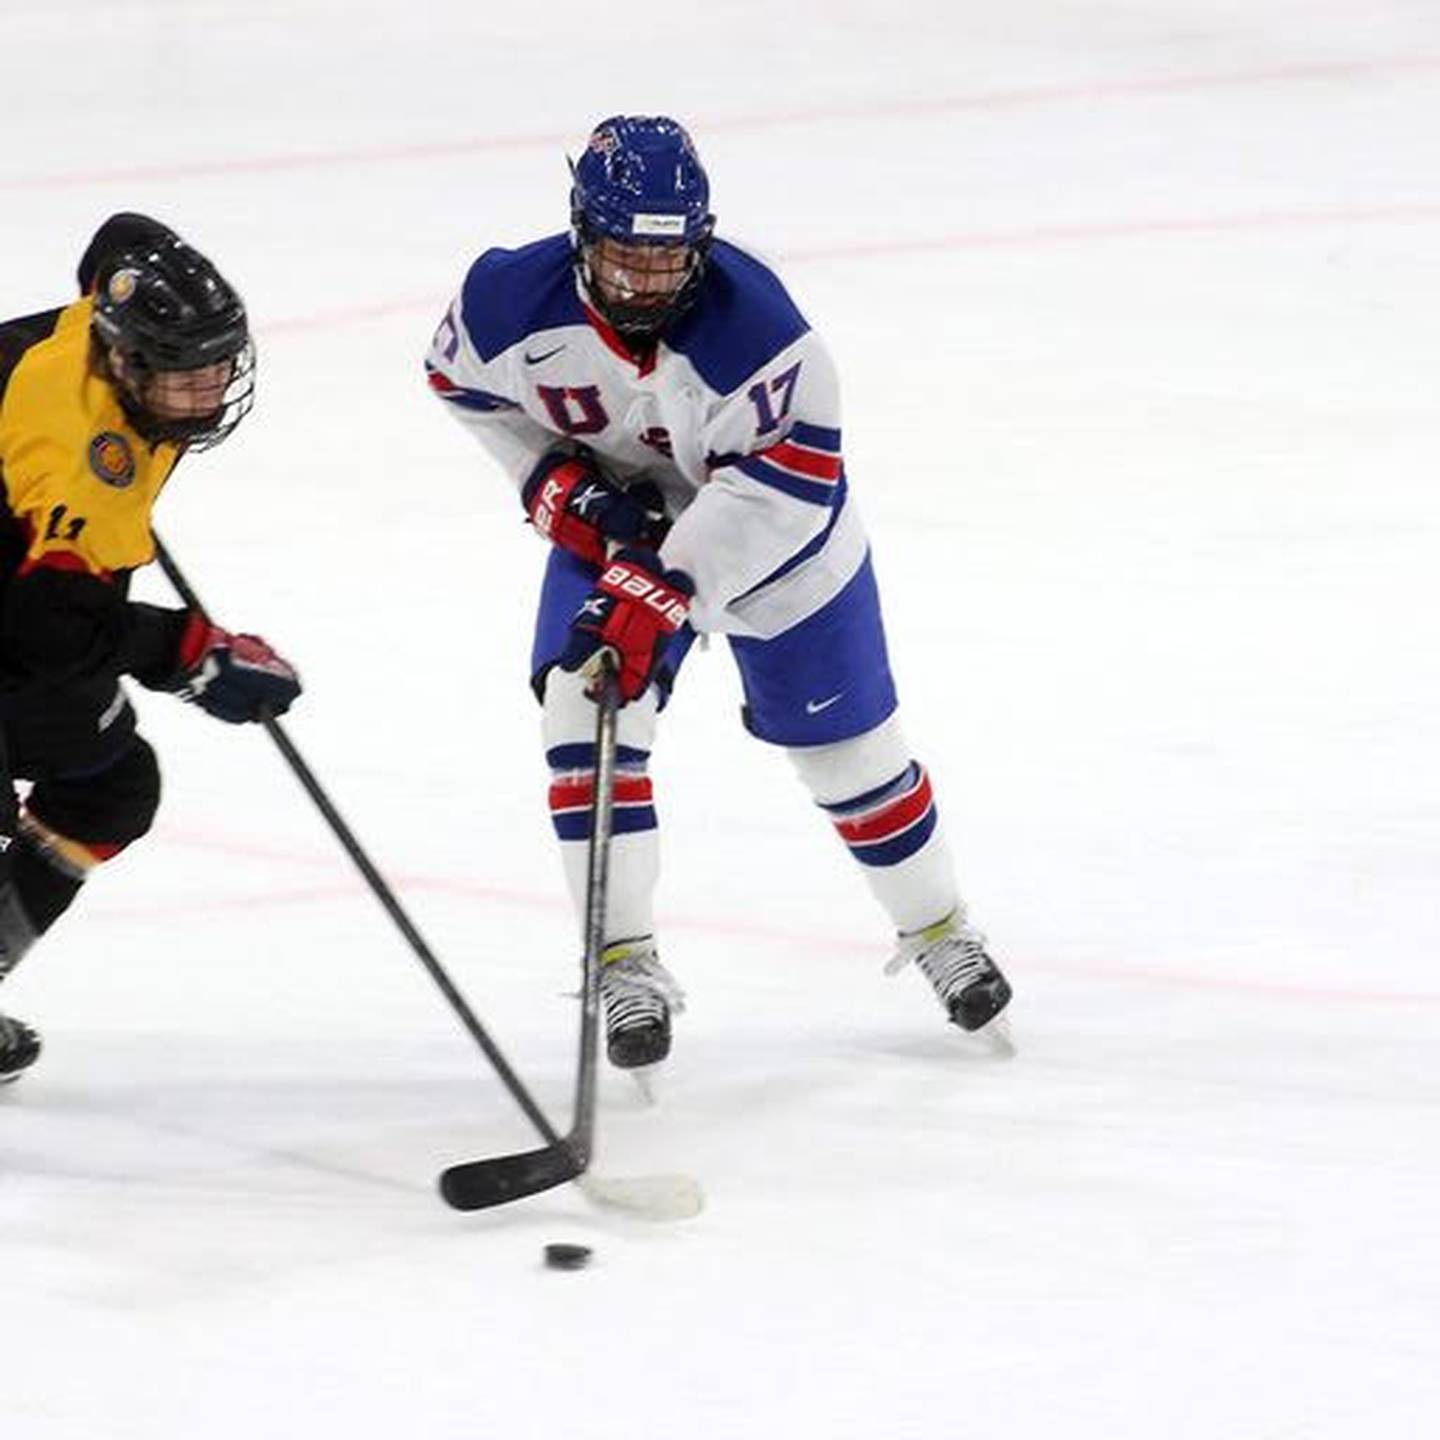 Mac Swanson of Anchorage of Team USA skates with the puck during a match at the Under 17 Five Nations Tournament